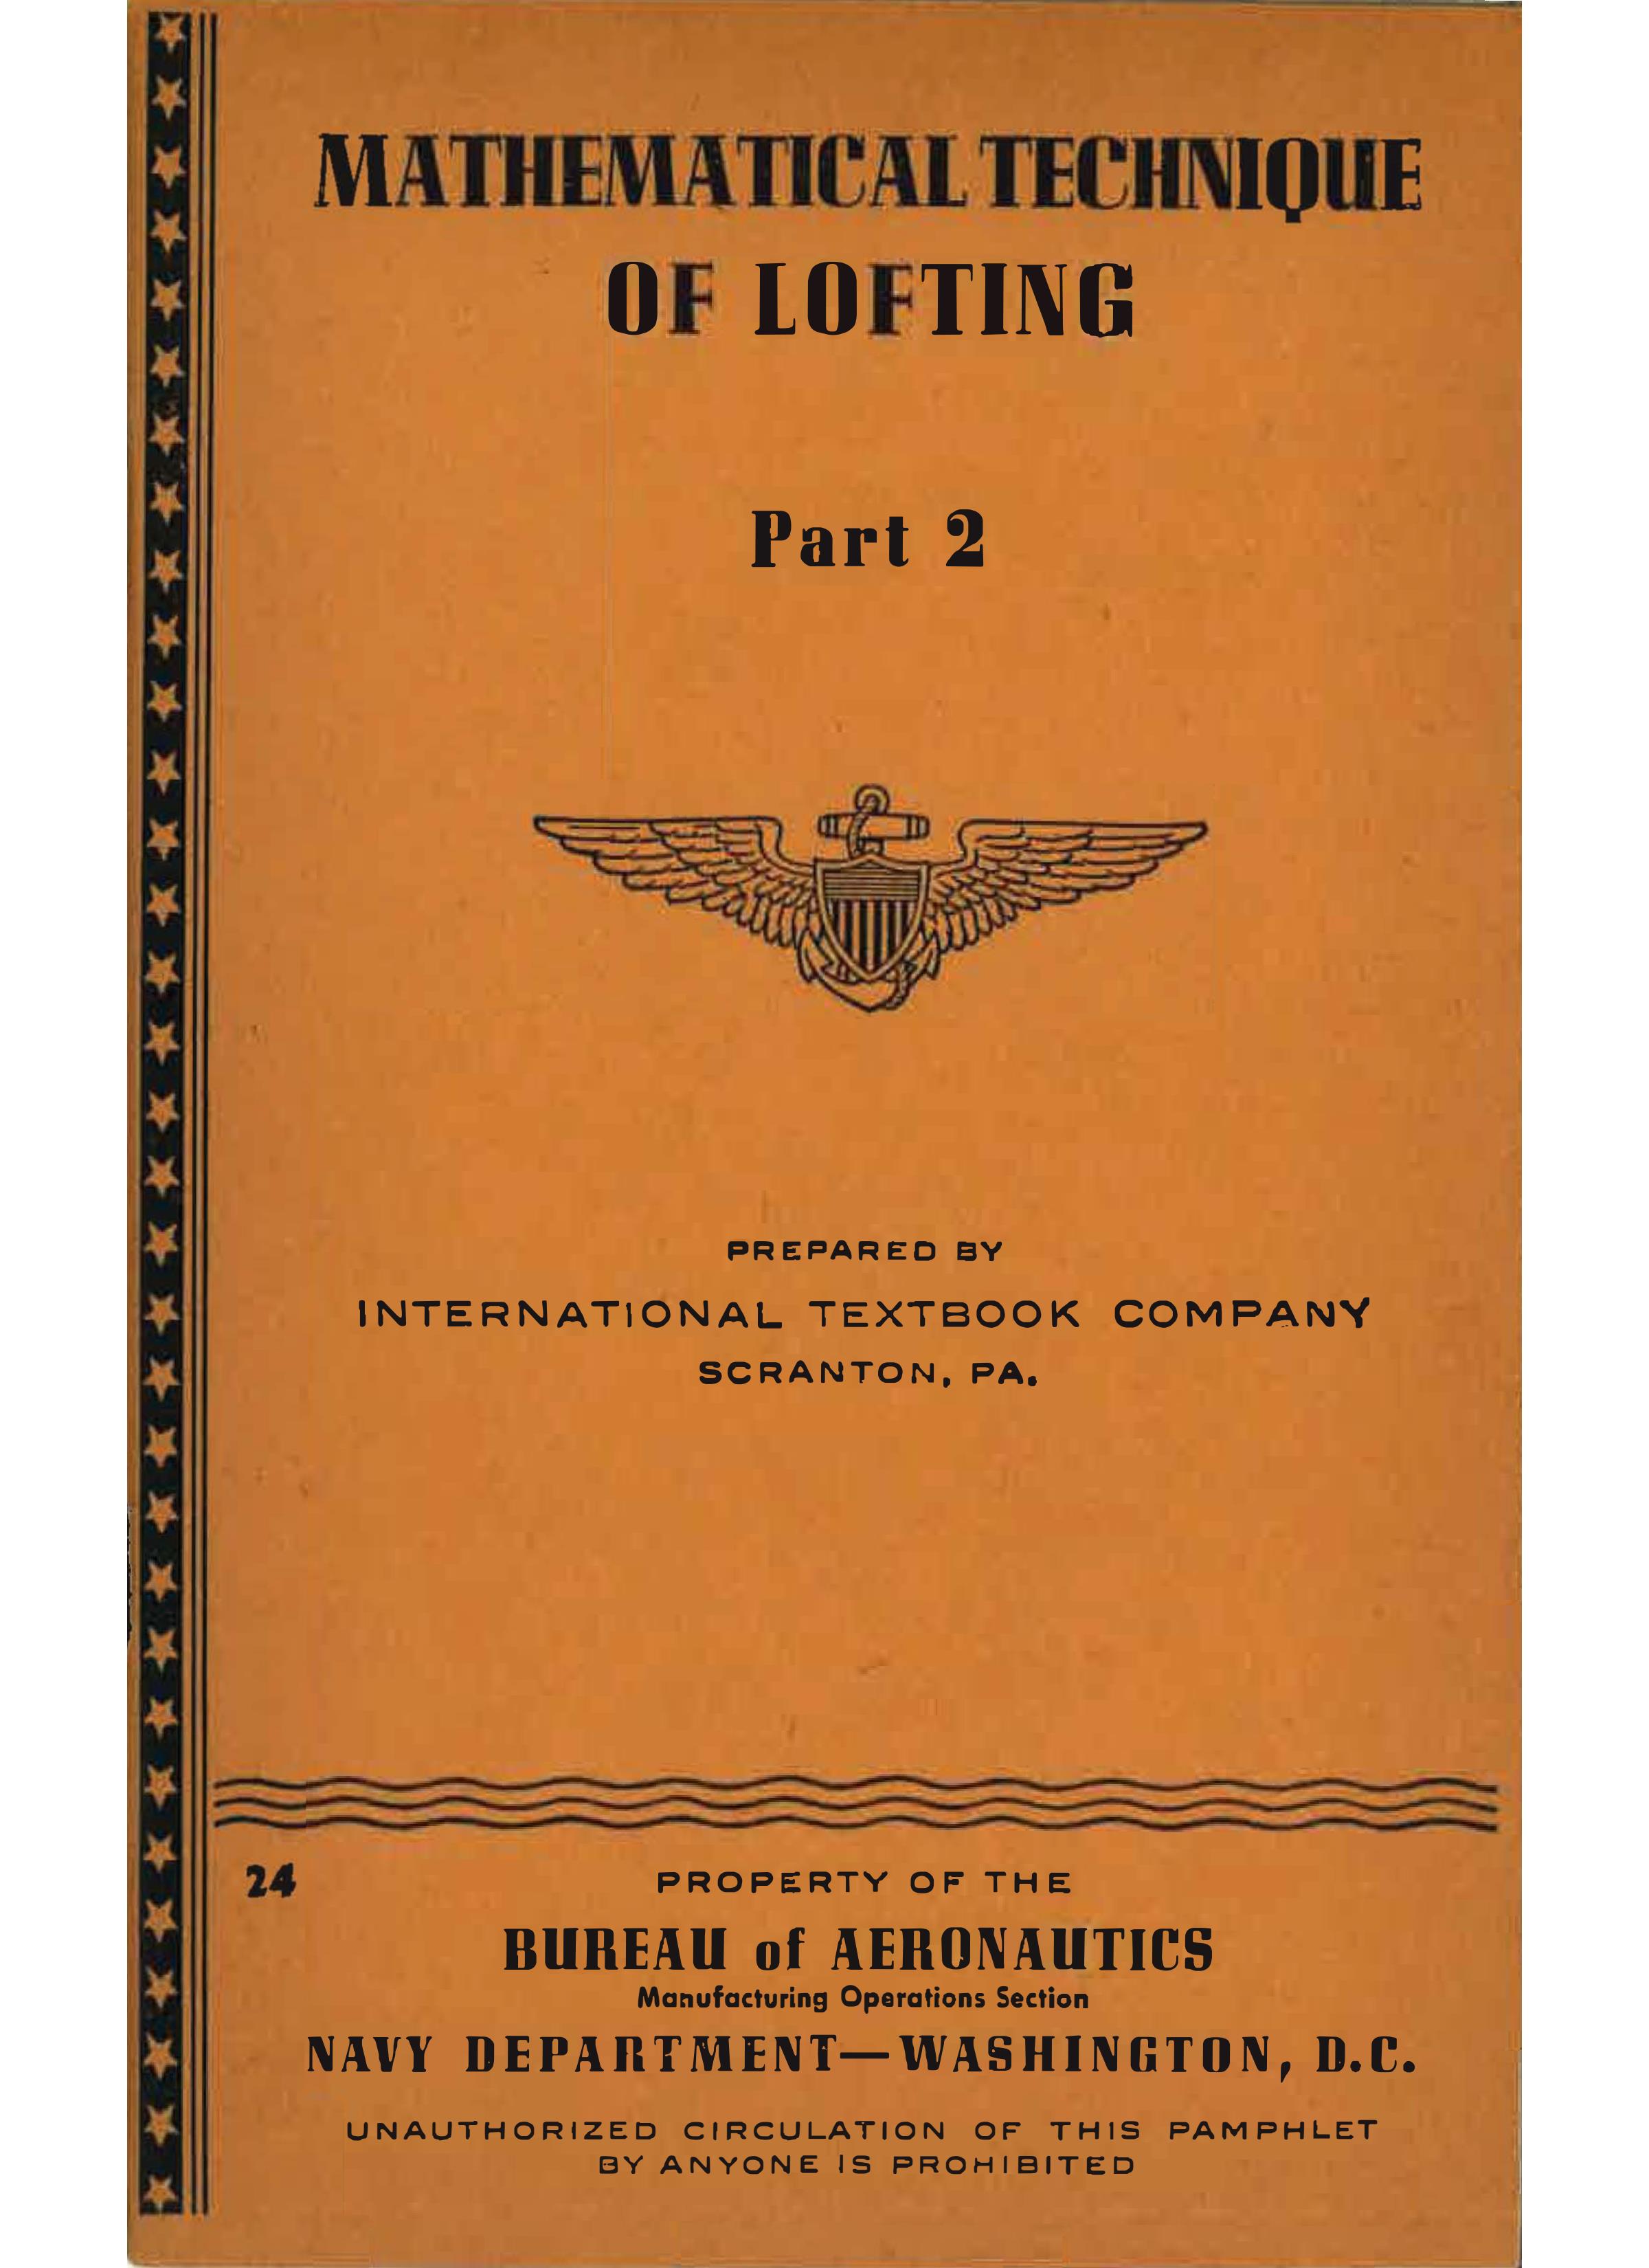 Sample page 1 from AirCorps Library document: Mathmatical Technique of Lofting - Part 2 - Bureau of Aeronautics